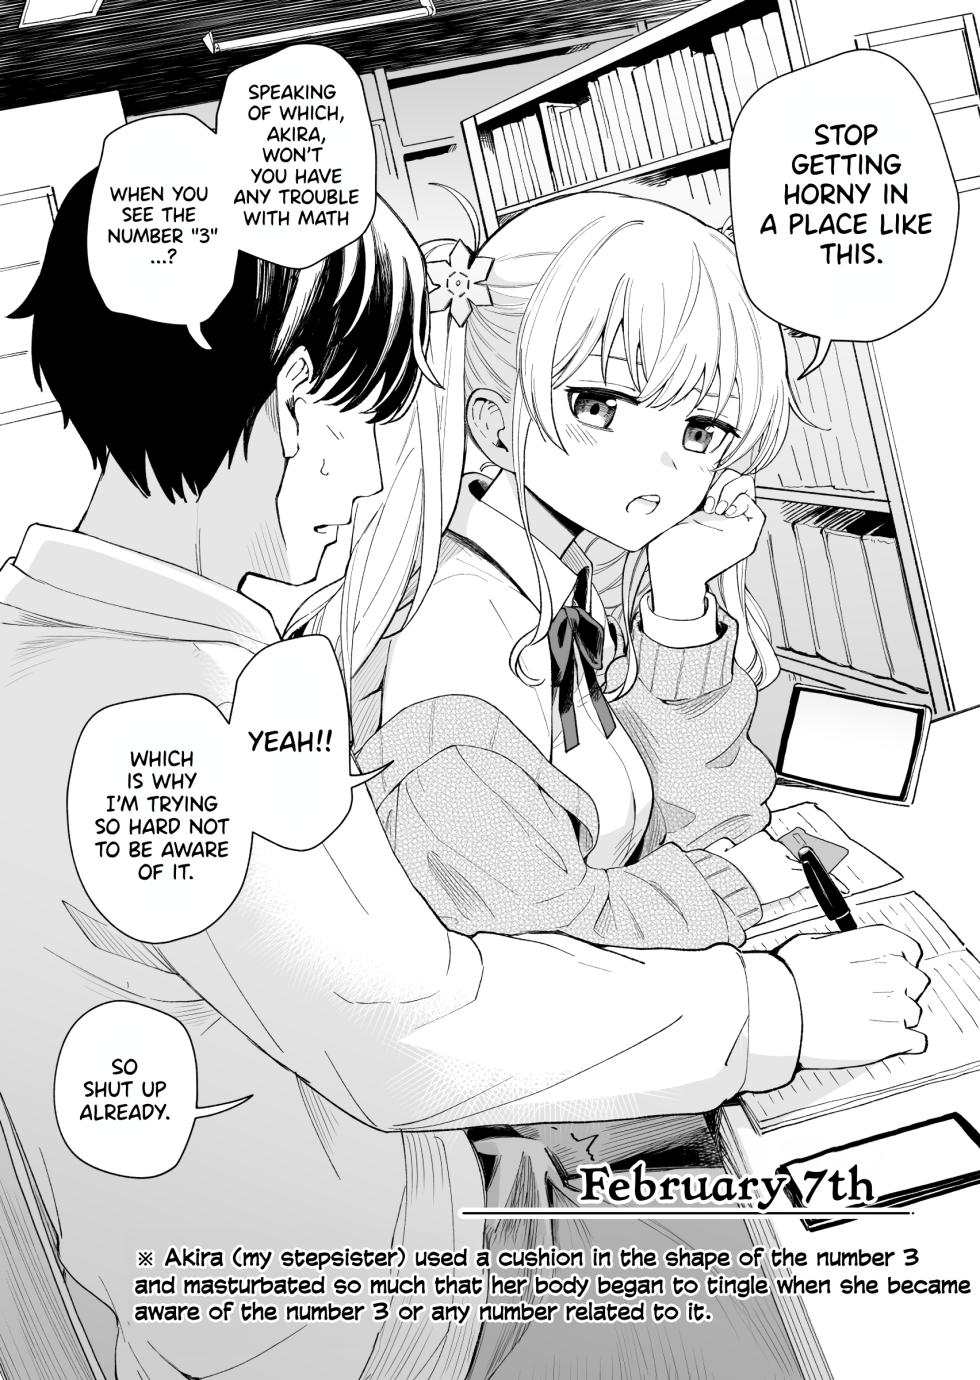 [Hiro no Ke (Hiro Hirono)] Sasete Kureru 3 no Gimai | A Younger Stepsister Who Only Has Sex With Me on Days That are Divisible by 3 or on Days That Include The Number 3. [English] [HeatManga] - Page 9